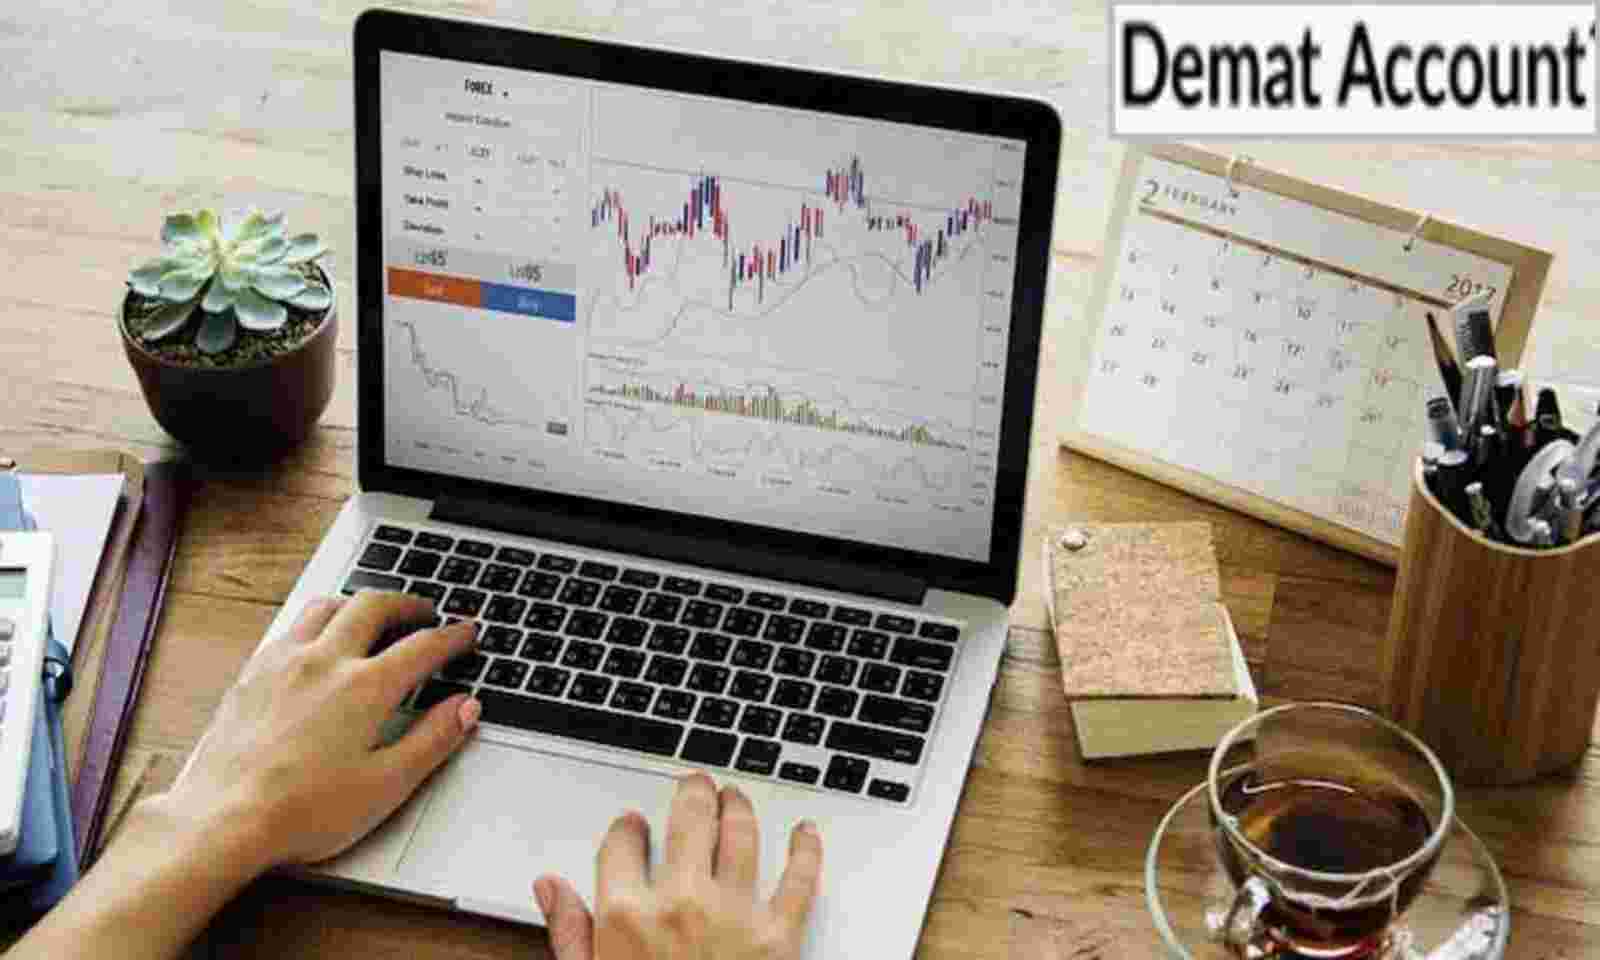 6 Steps to Open Demat Account